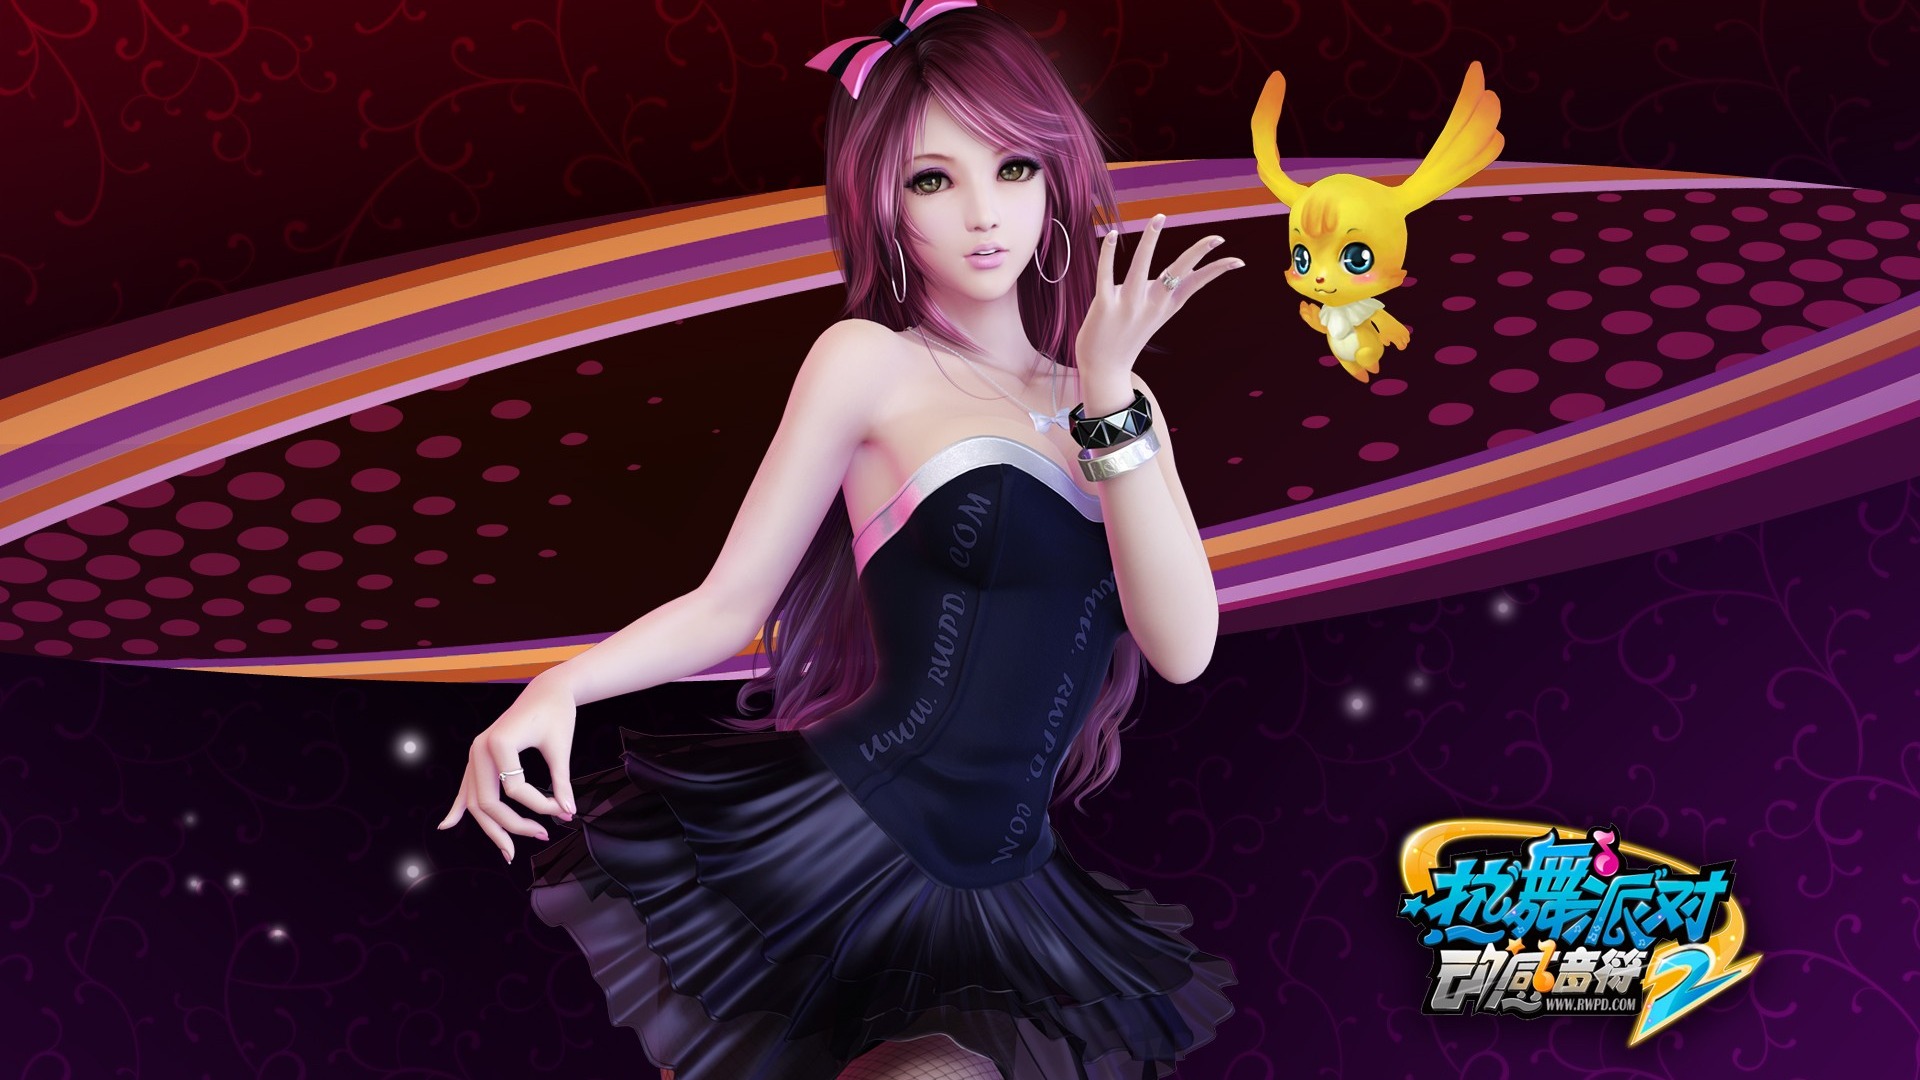 Online game Hot Dance Party II official wallpapers #28 - 1920x1080